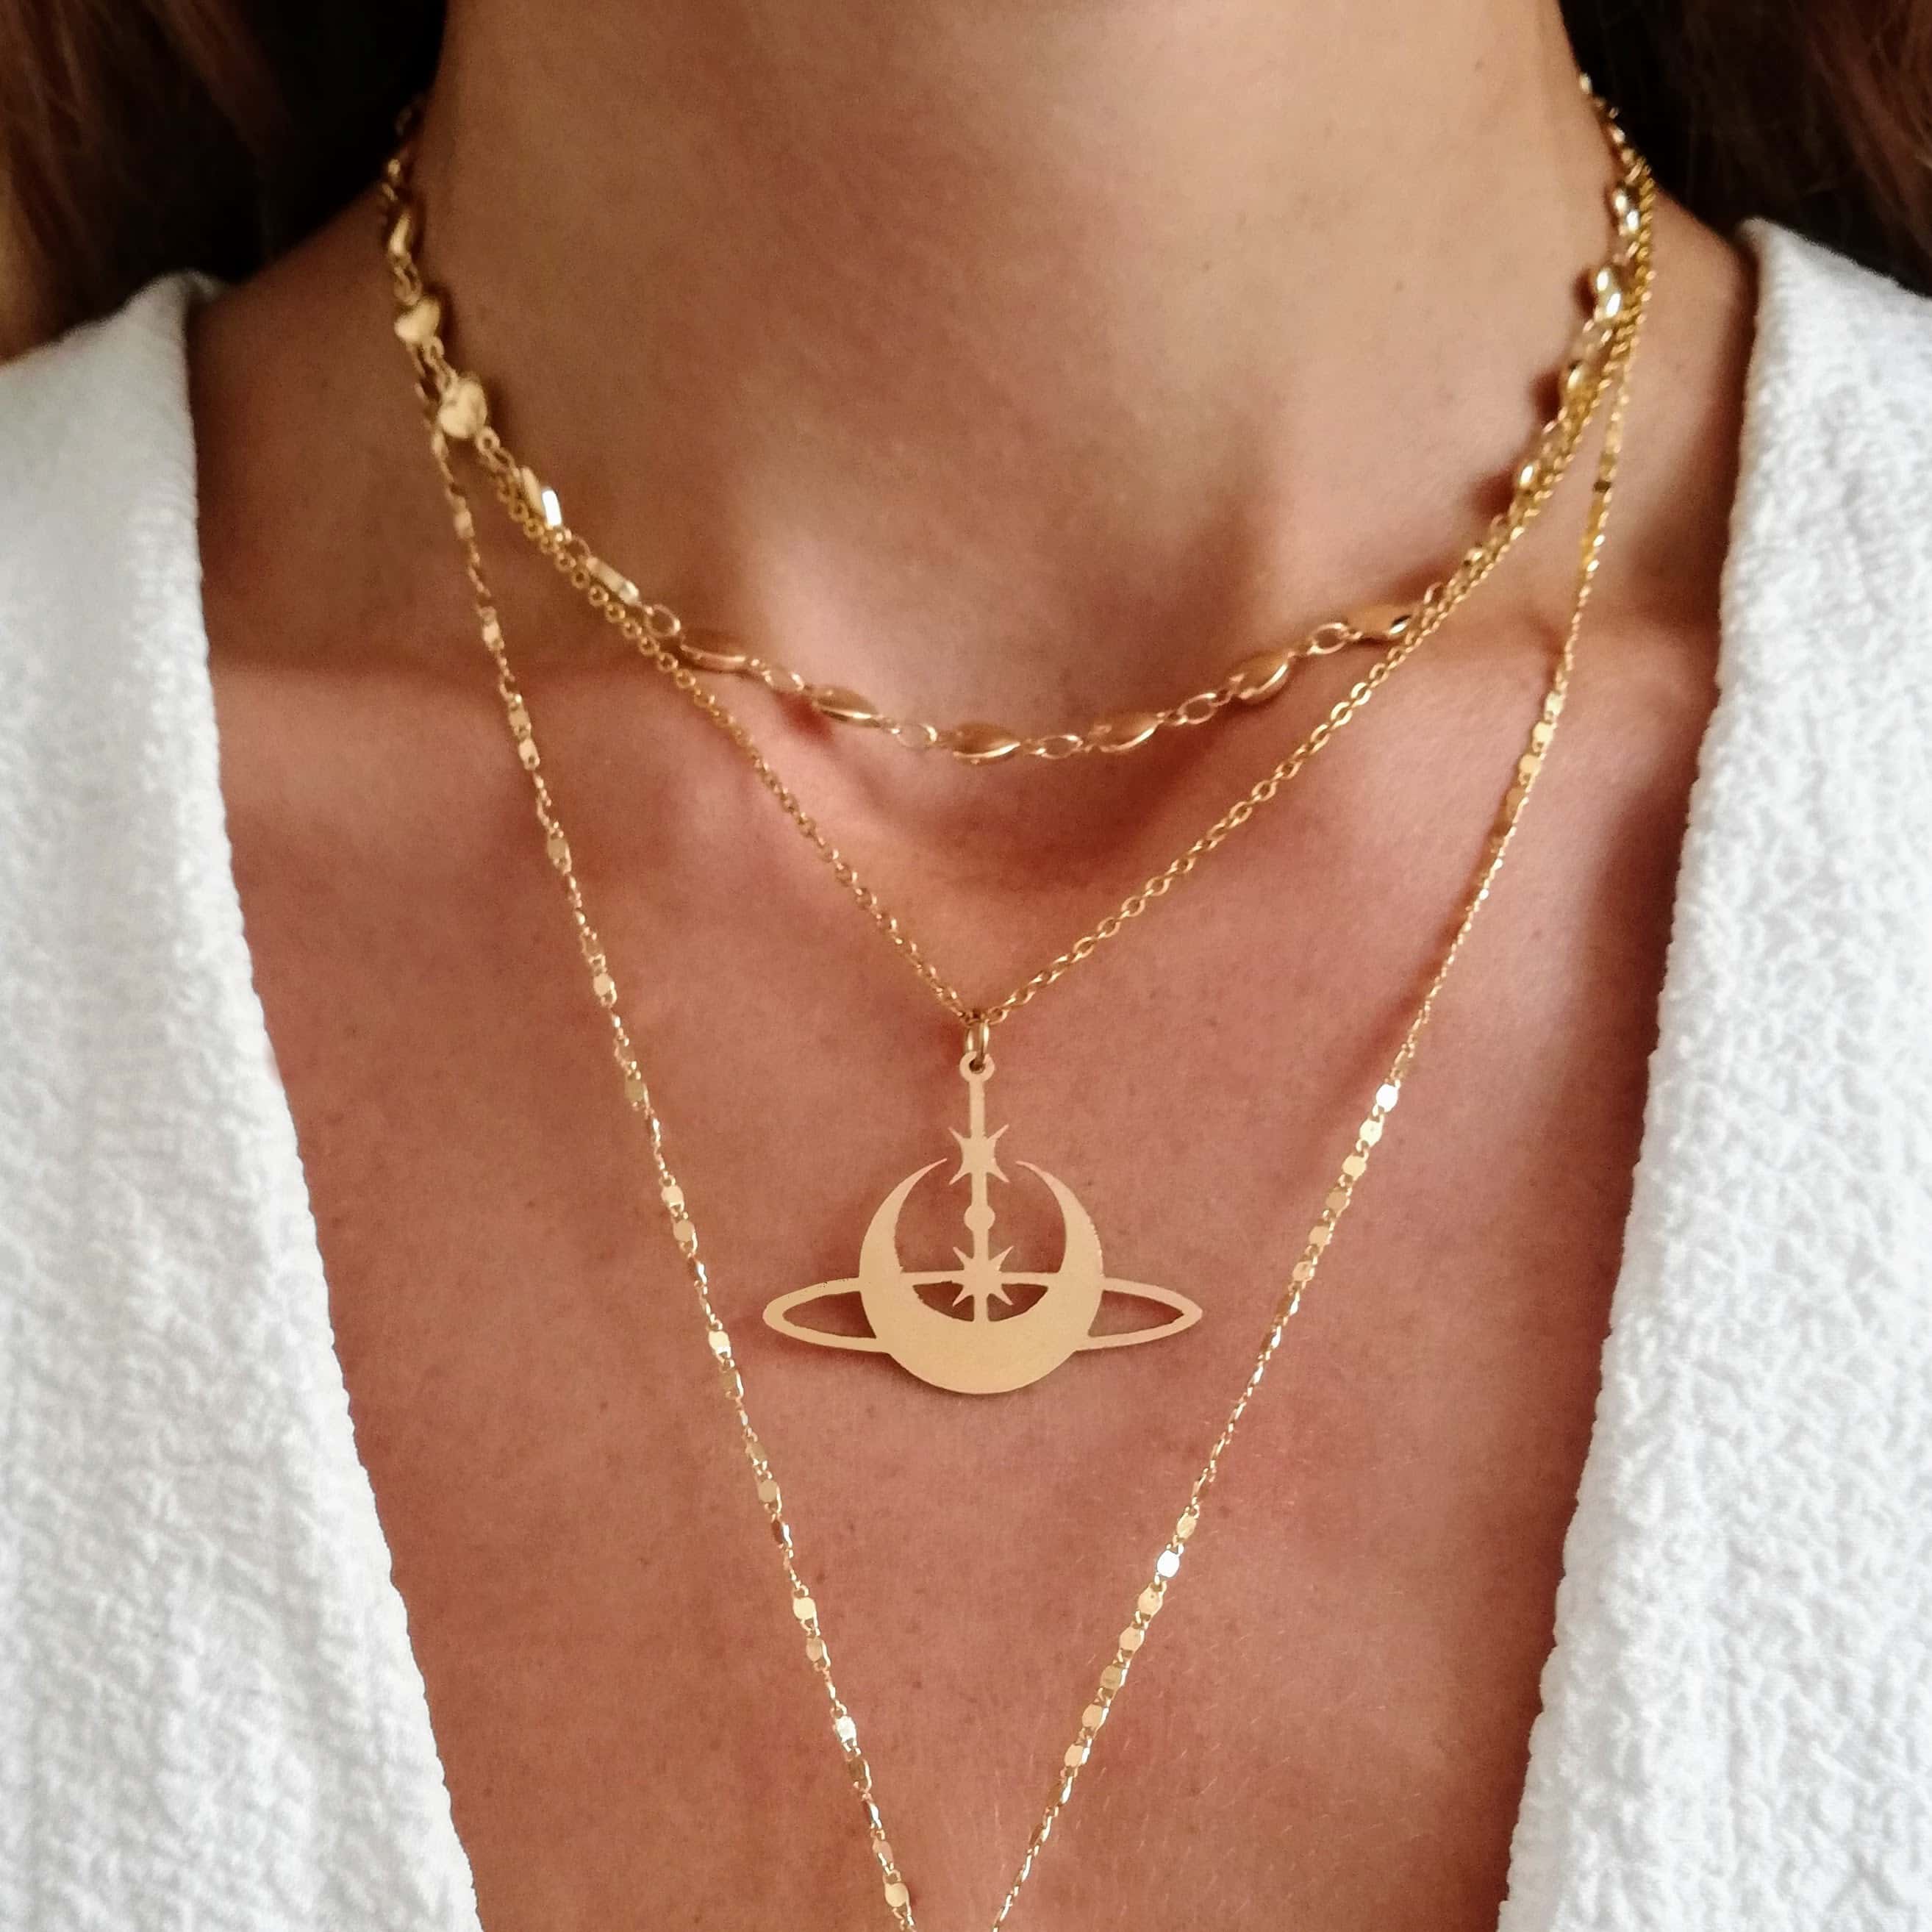 Collier saturne or j’accepte